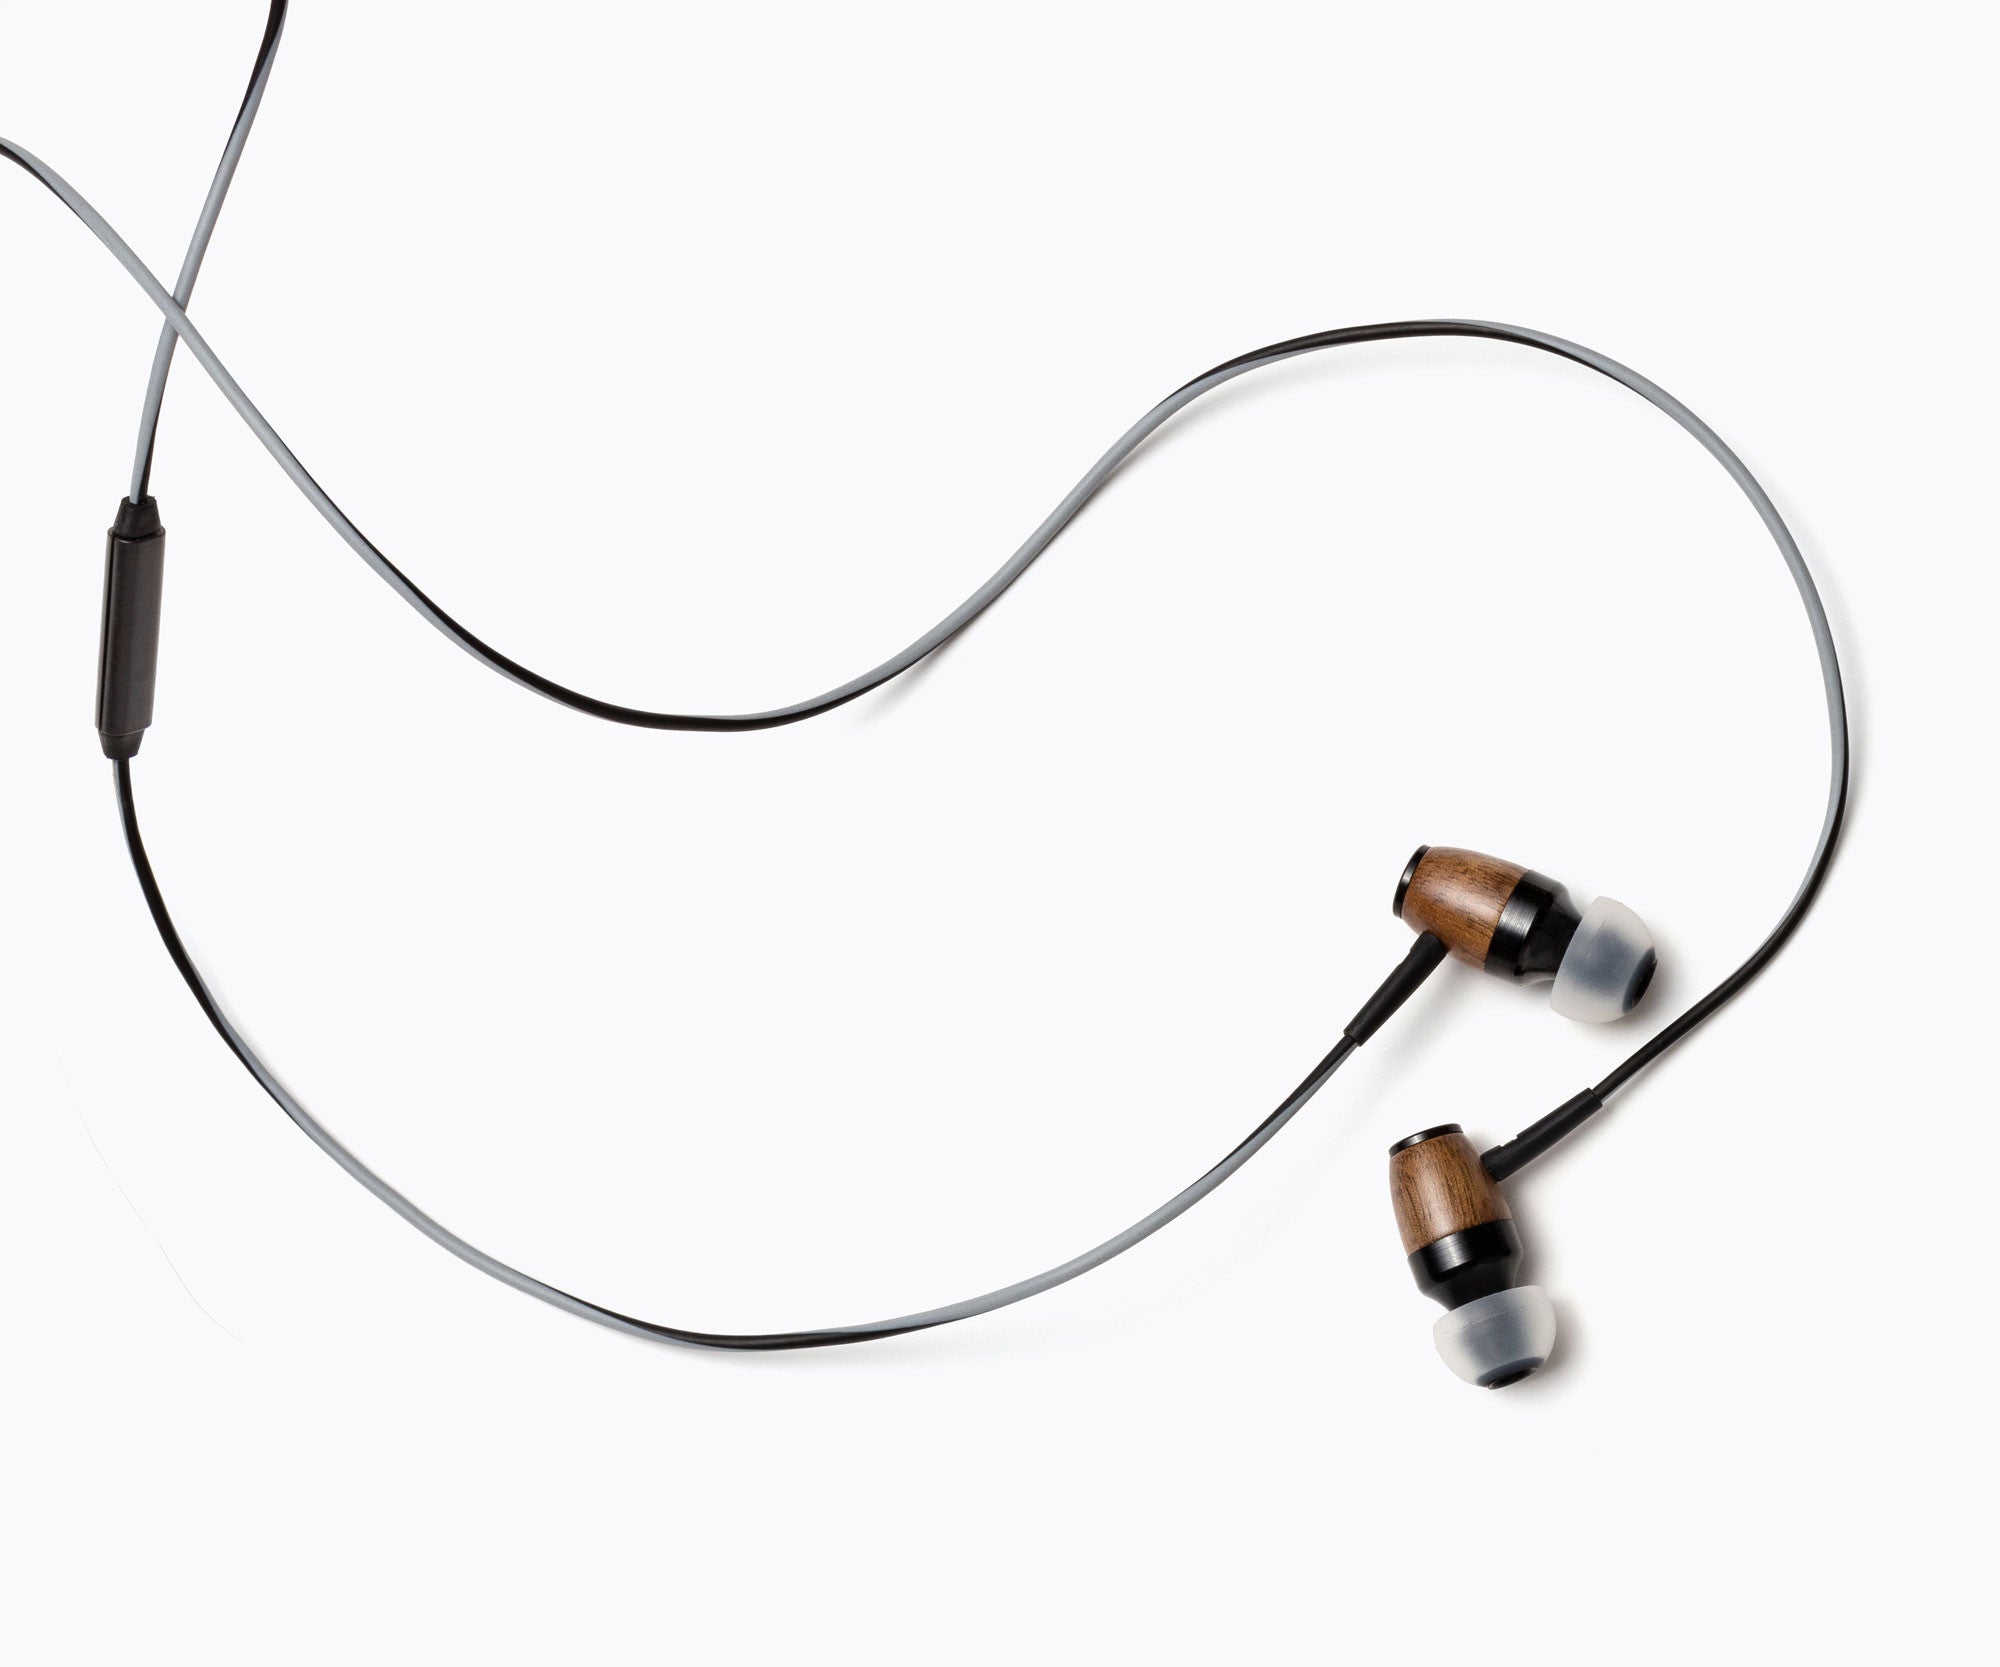 DRM In-Ear Wood Headphones - Gray and Black